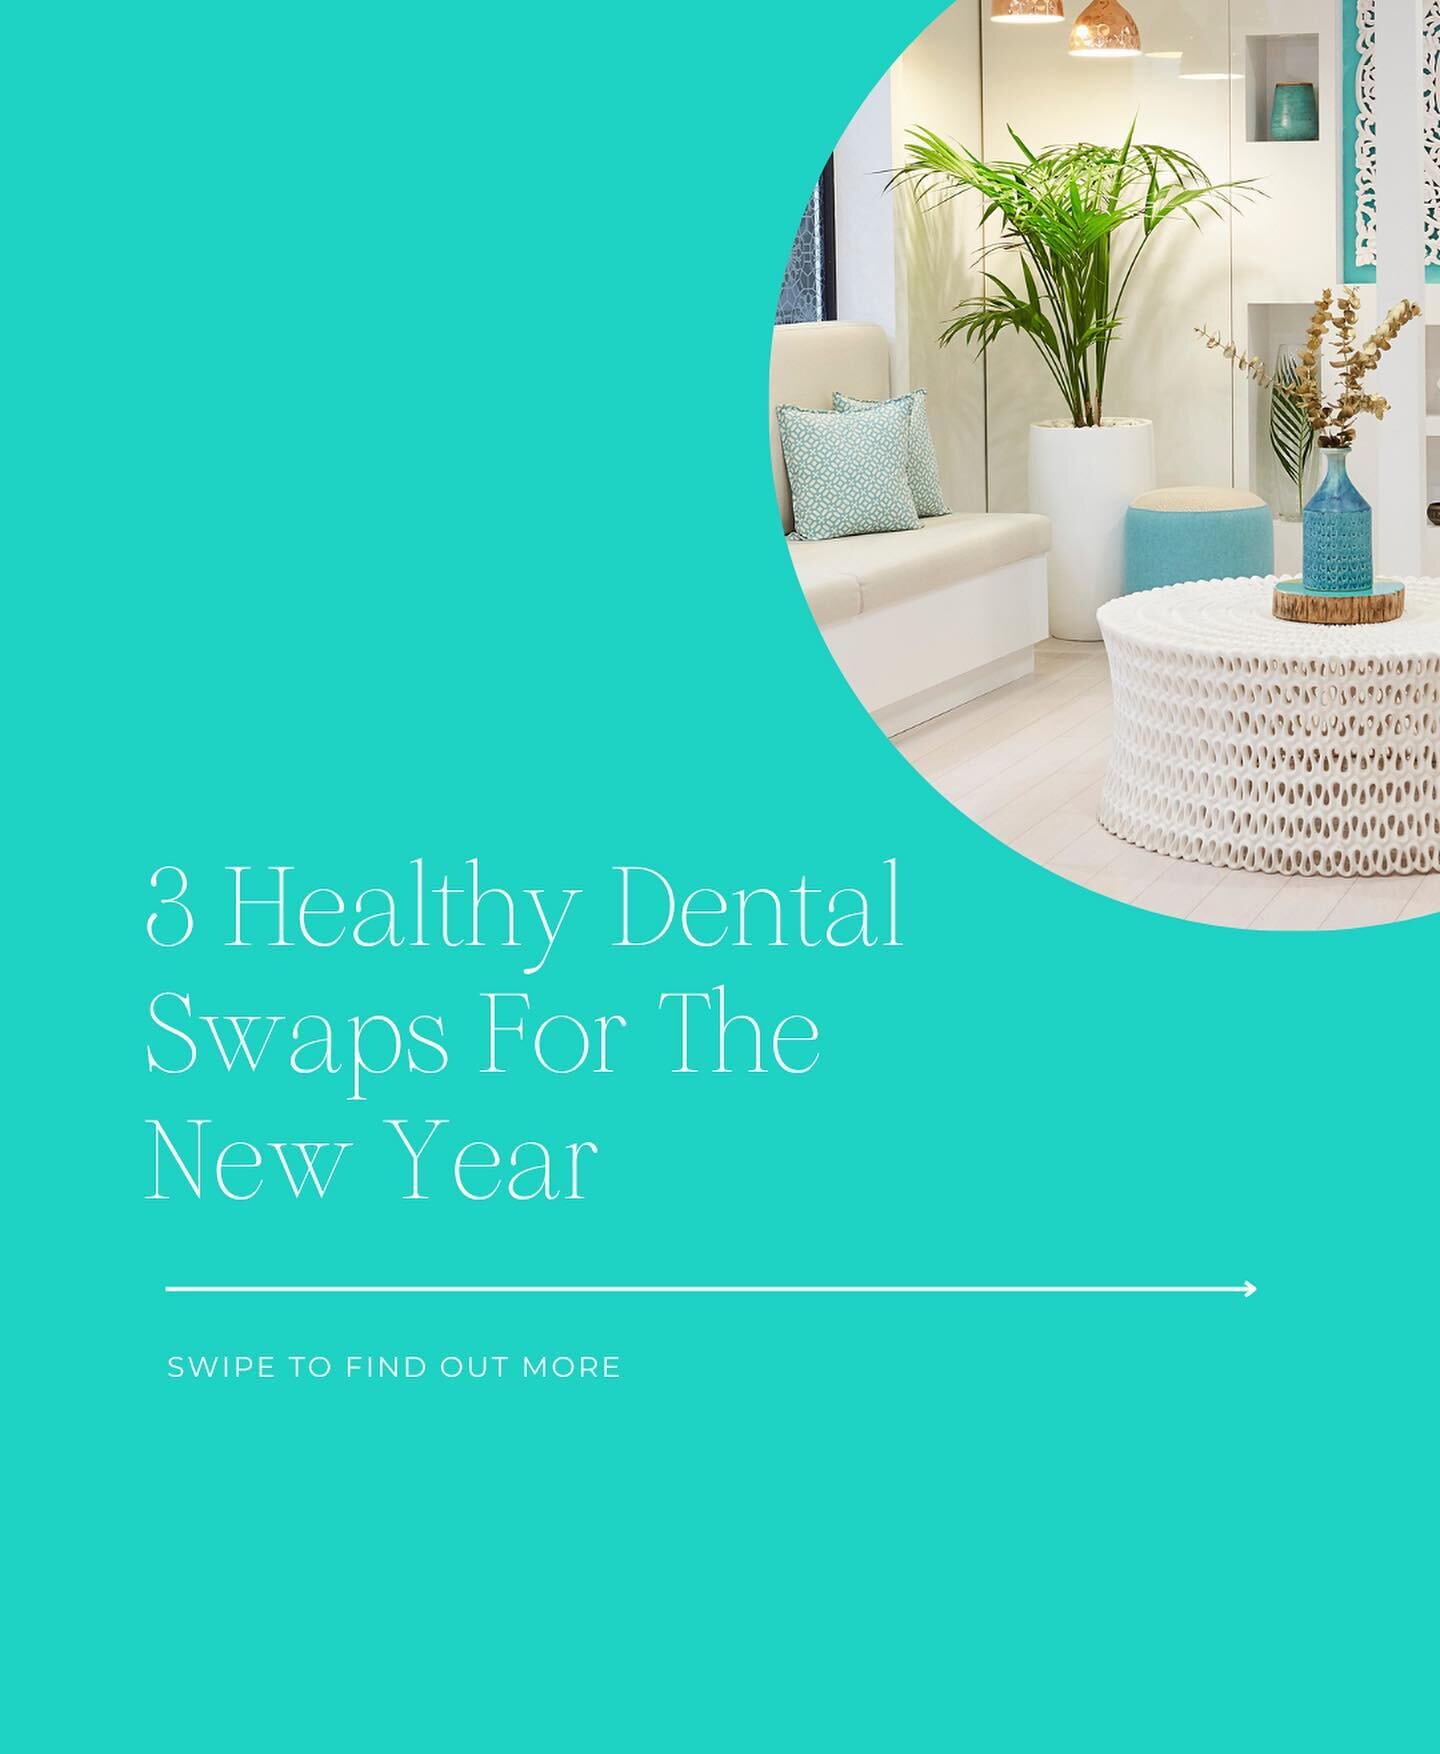 As we count down to the new year it&rsquo;s a great time to think about healthy, new habits. Have you thought about your daily dental care? Here are some super simple tips to keep you AND our planet healthy! 🌱☀️🌱

#holisticdentist #ayurveda #health